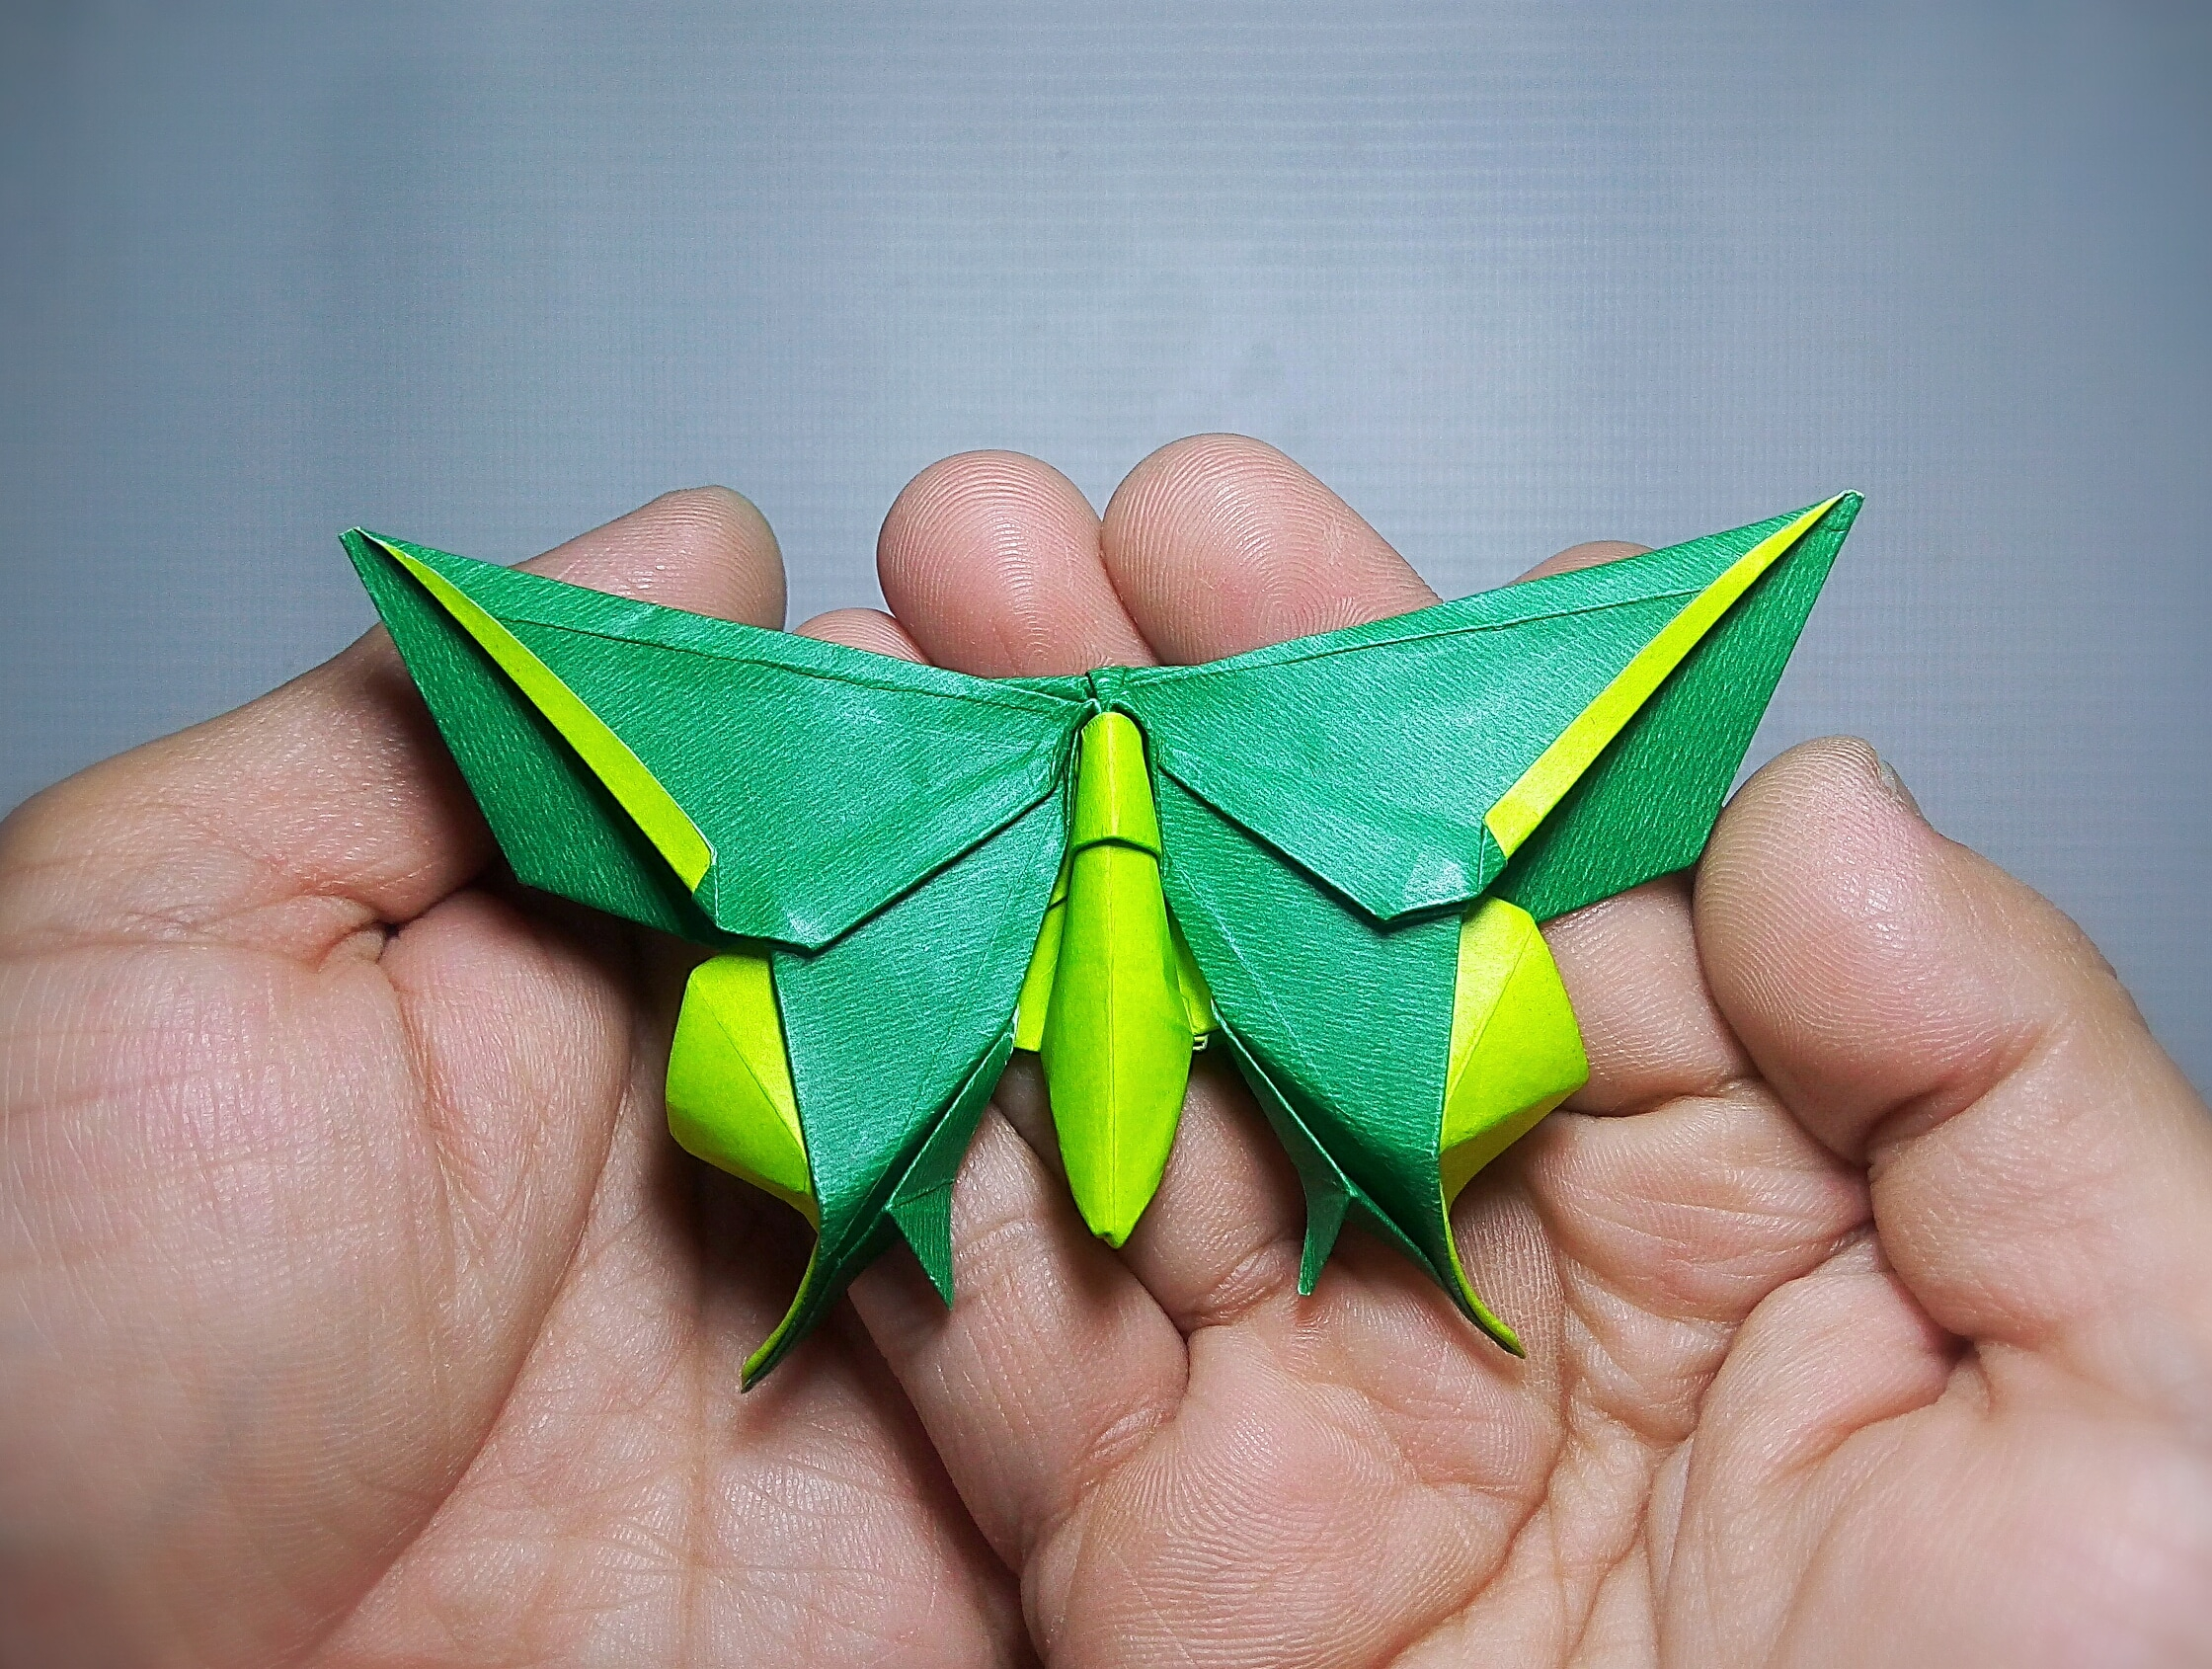 How To Fold Origami Butterfly Origami Butterfly For Reiko Nishioka Michael Lafosse Tutorial On